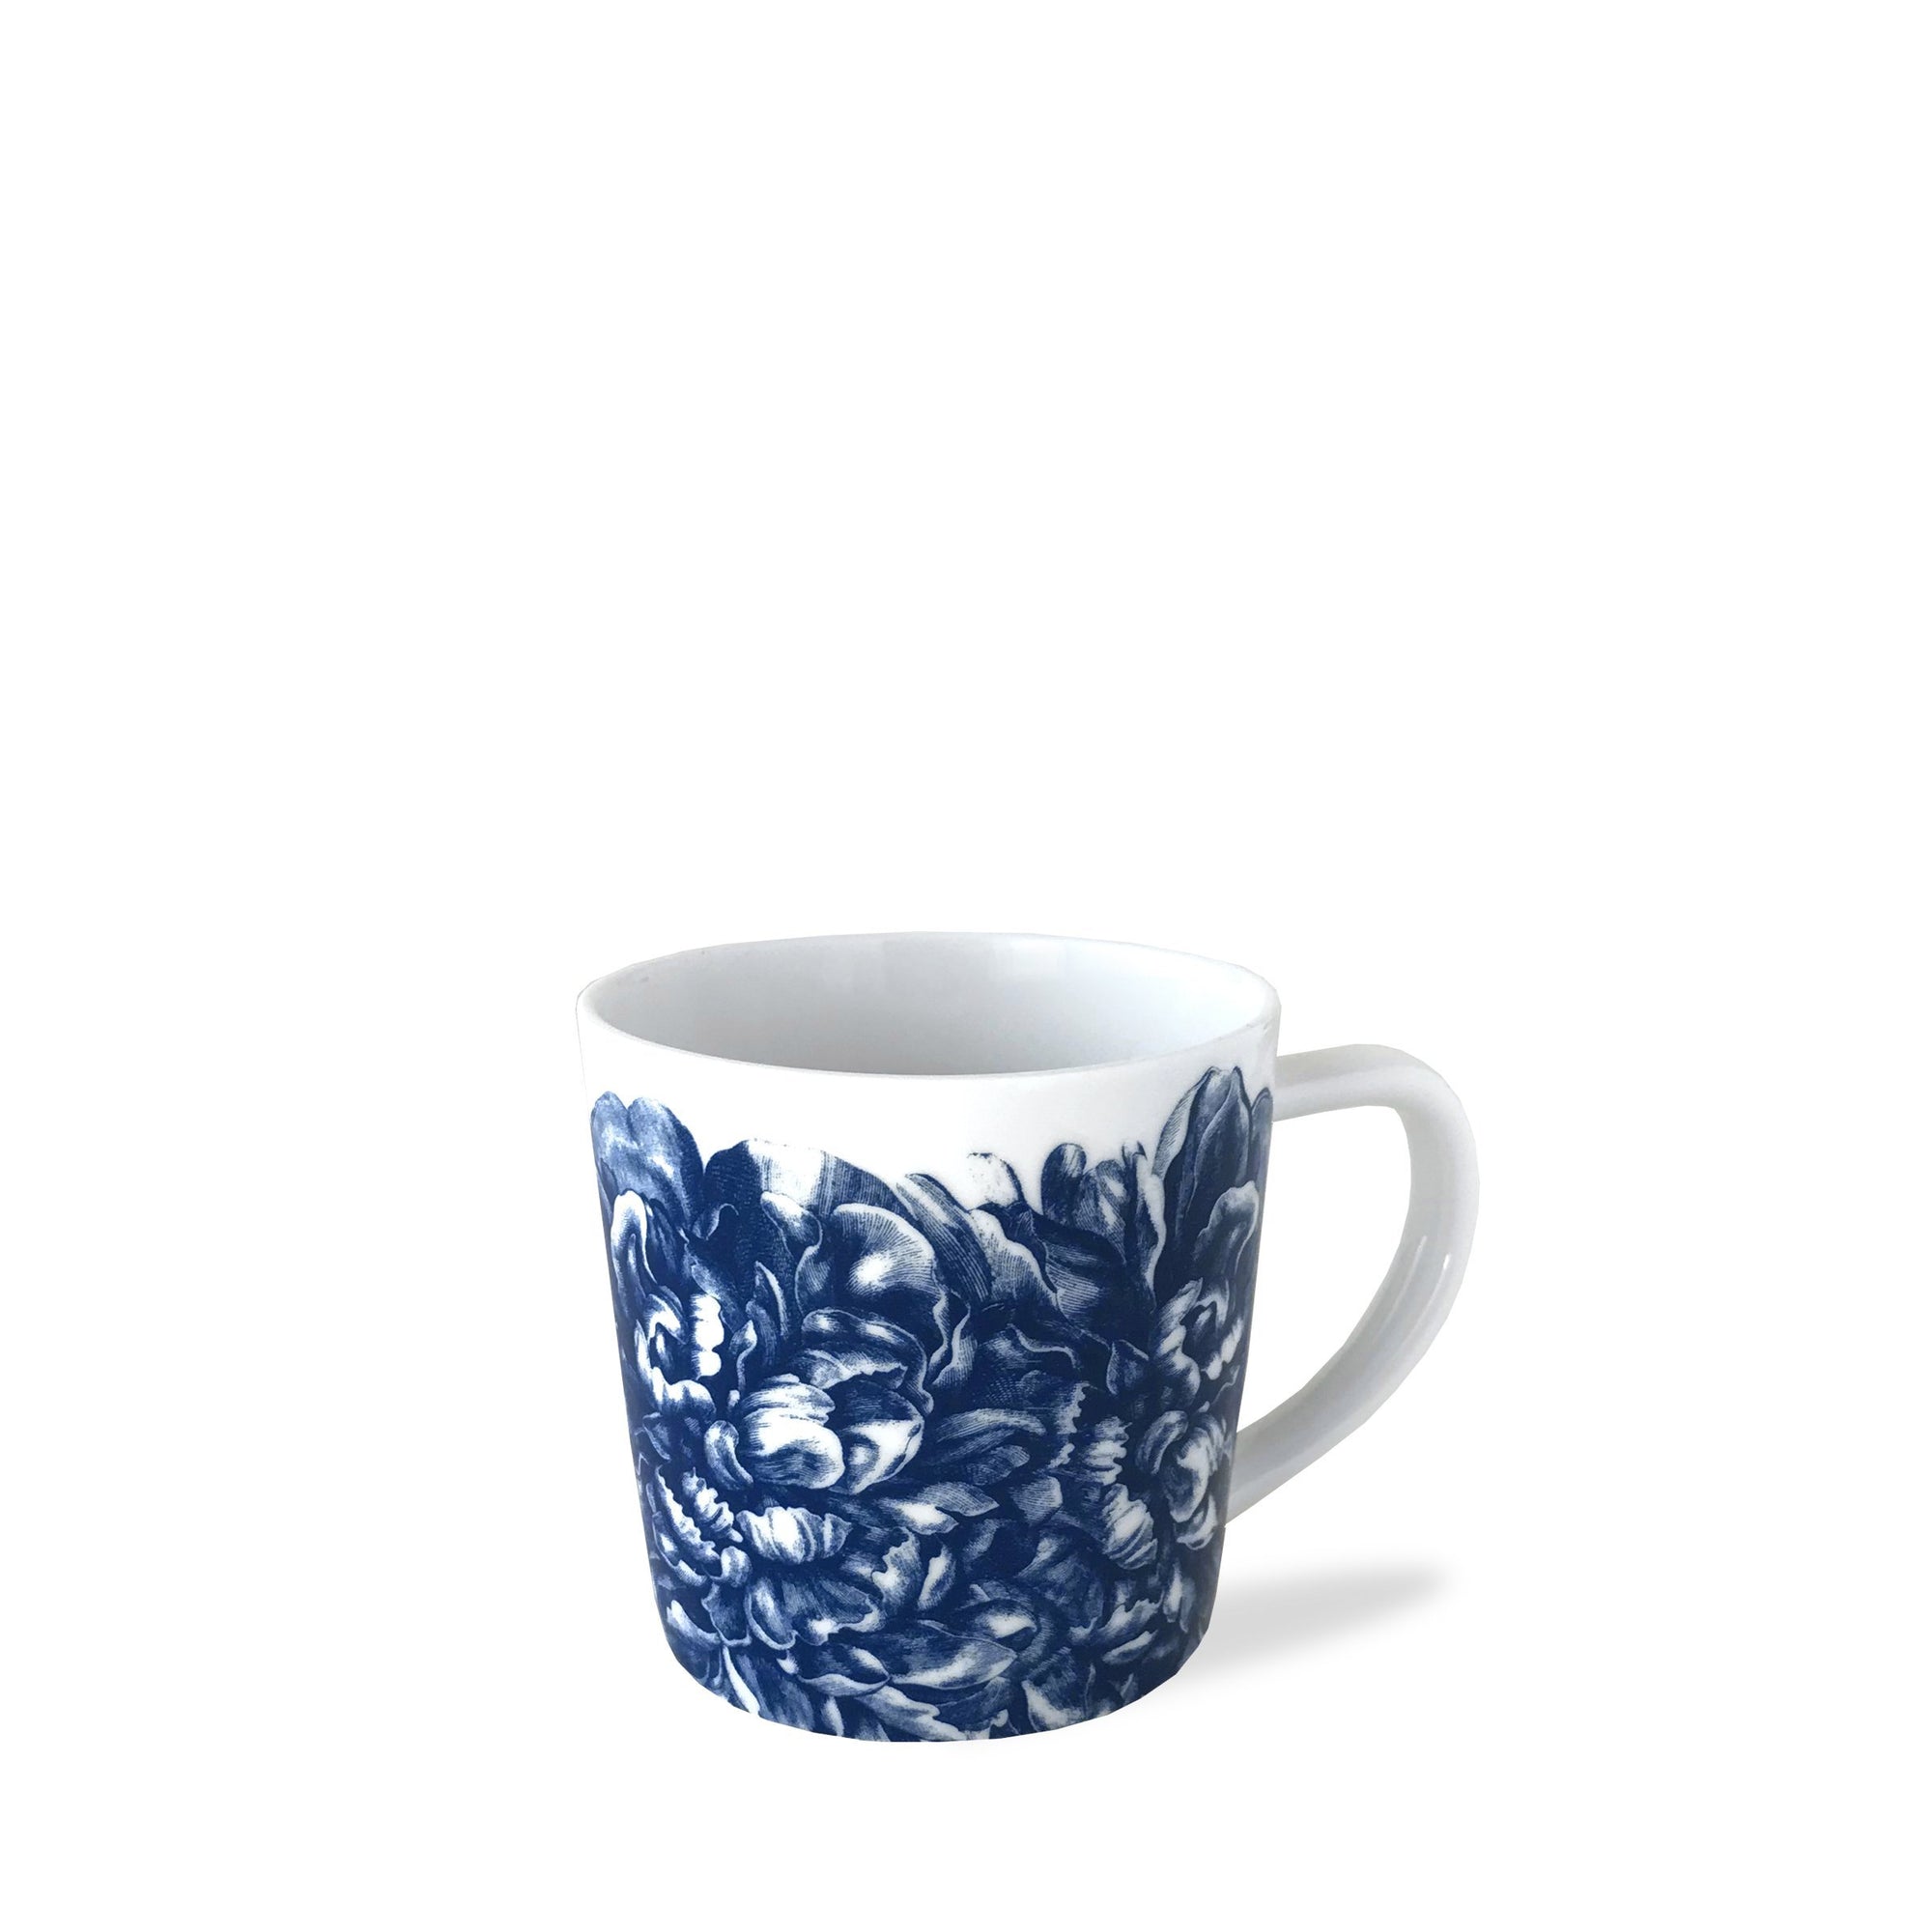 A Peony Mug from Caskata Artisanal Home, with a blue floral pattern, isolated on a white background.